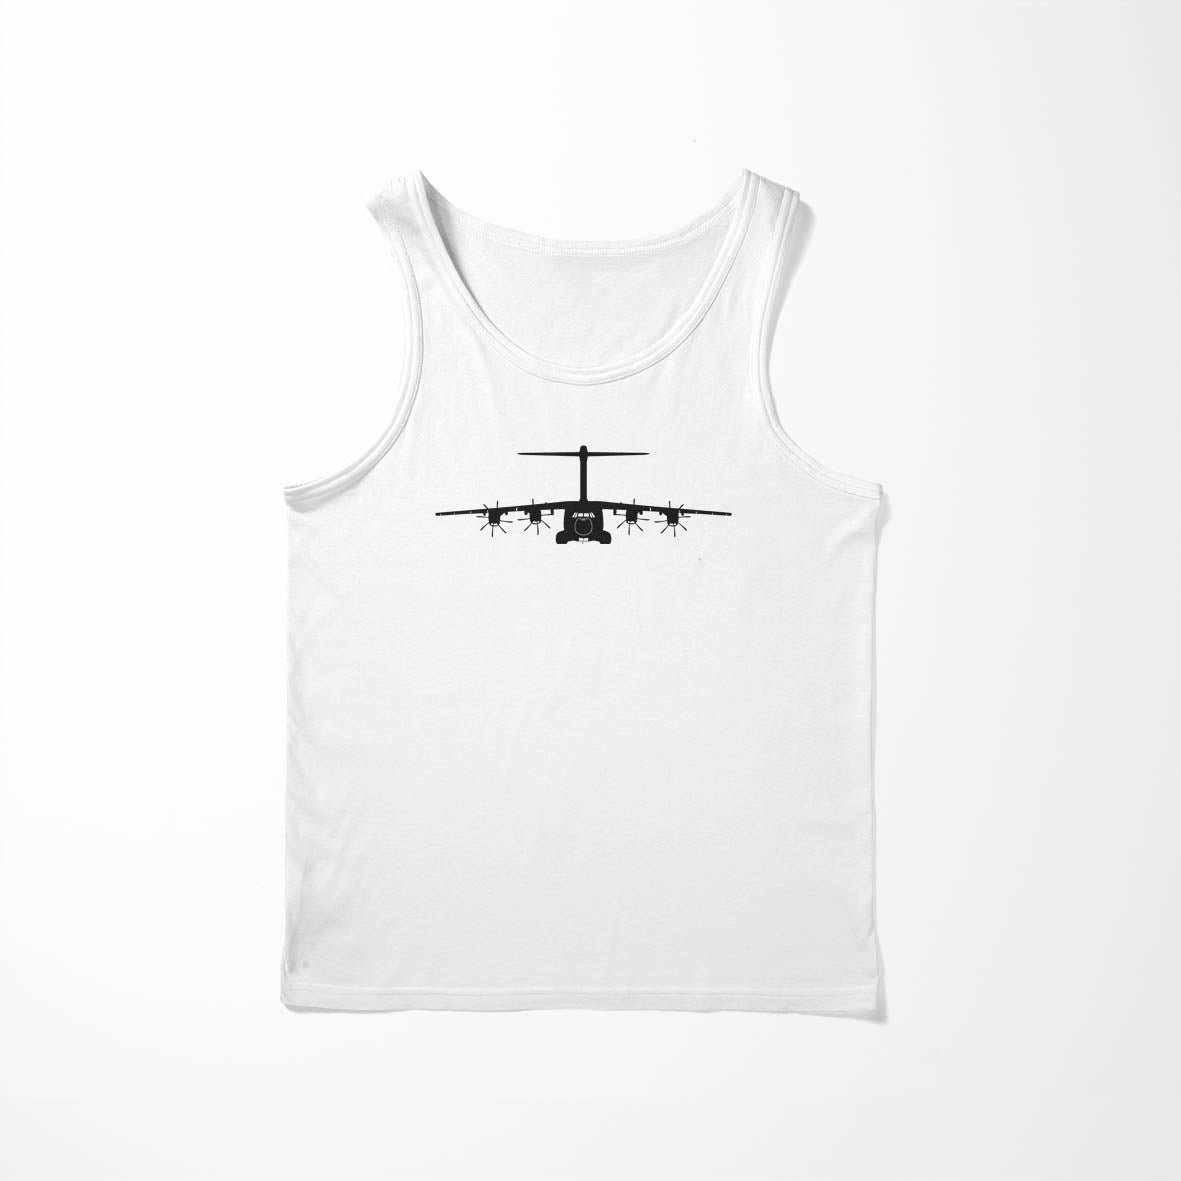 Airbus A400M Silhouette Designed Tank Tops